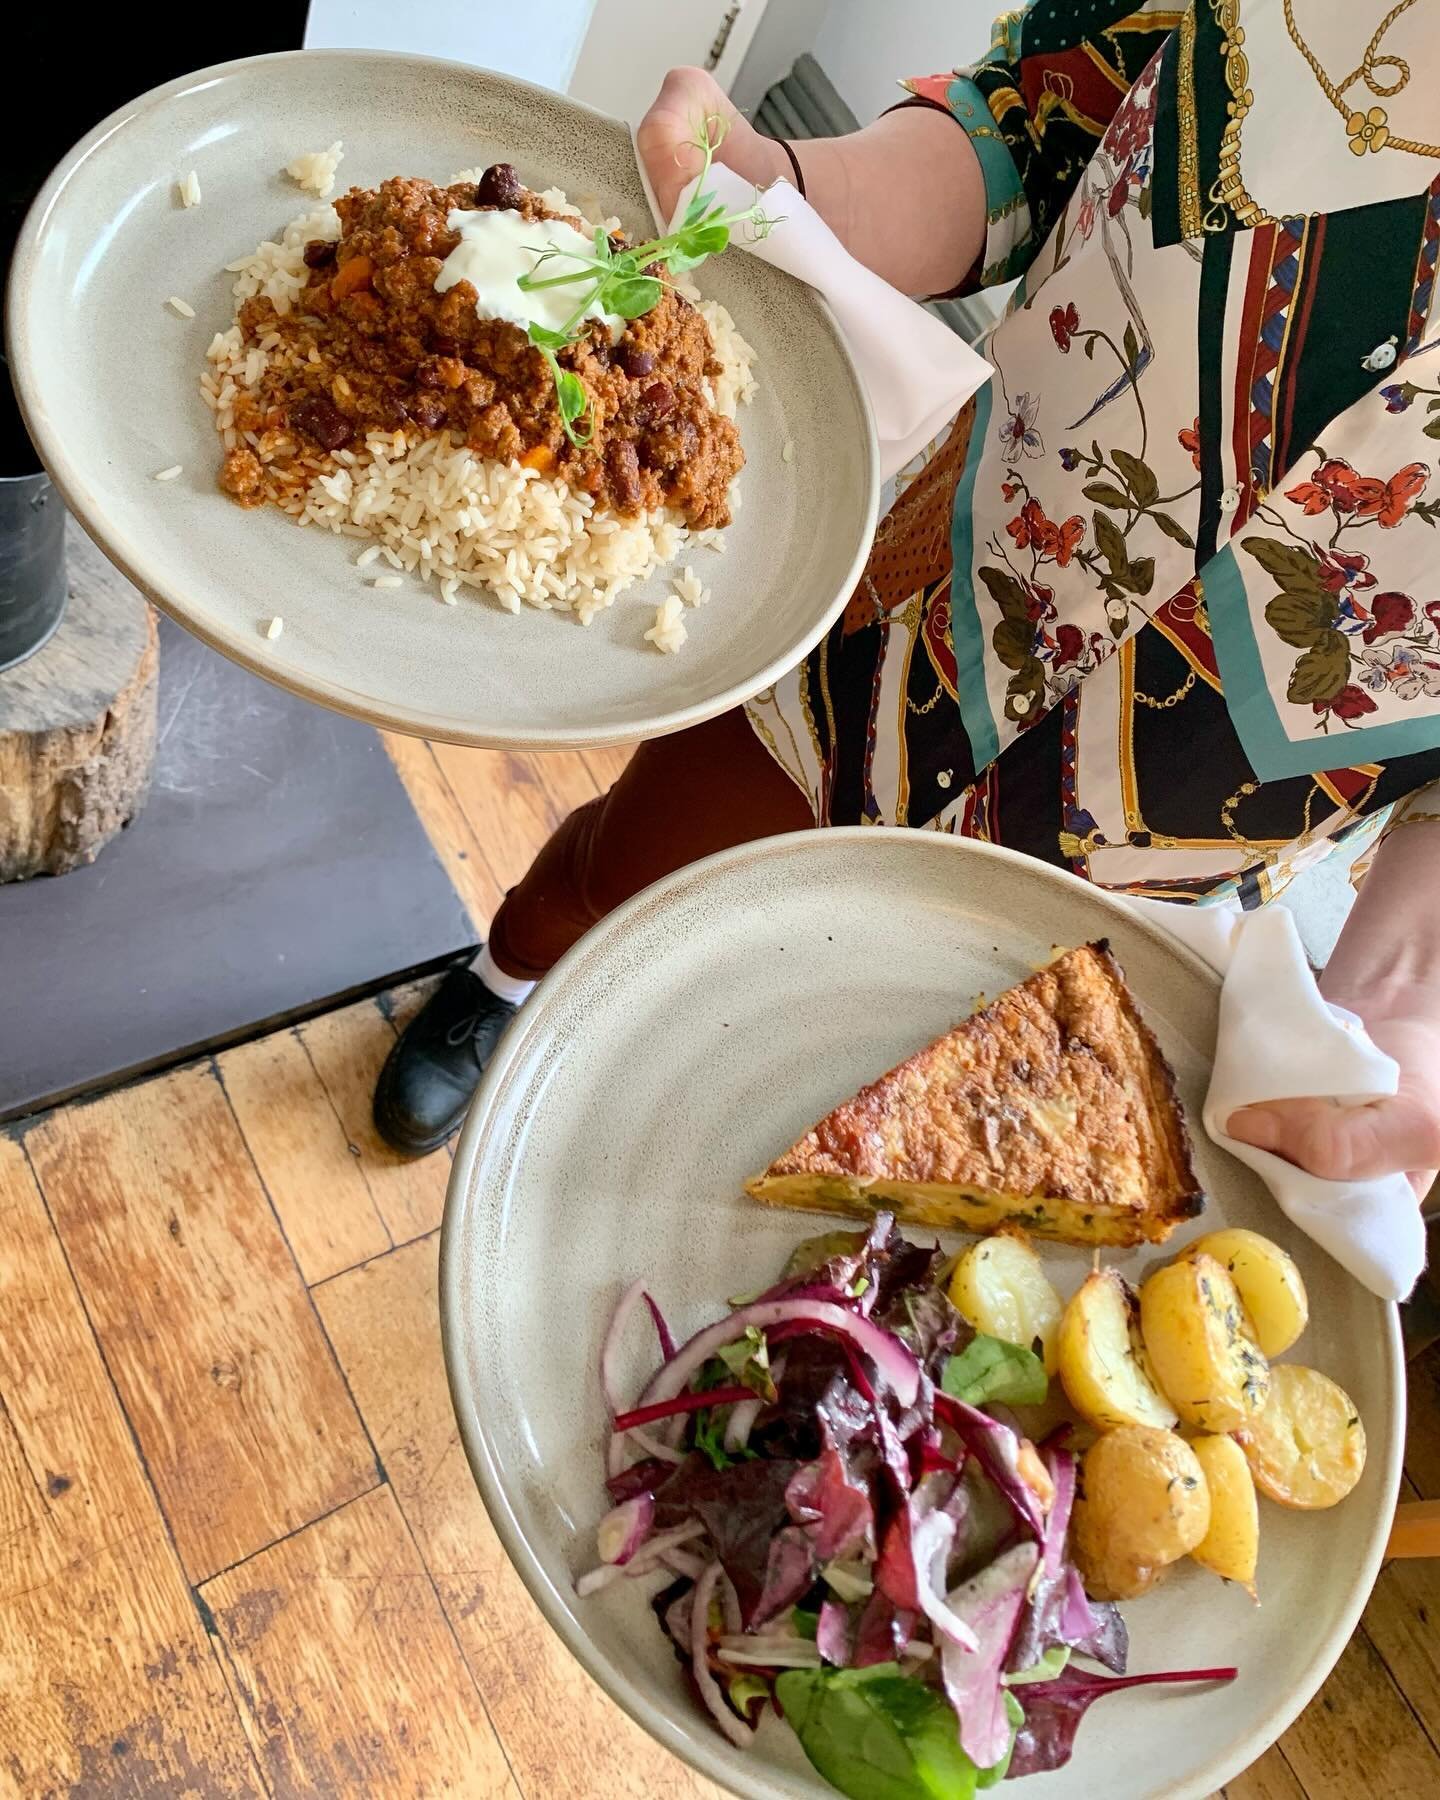 Make Lunch Time your favorite part of the day with The Railways Set Lunch Menu! 😍 our set lunch menu is always a popular choice with our guests, it&rsquo;s quick, it&rsquo;s easy and it&rsquo;s delicious! 🍽